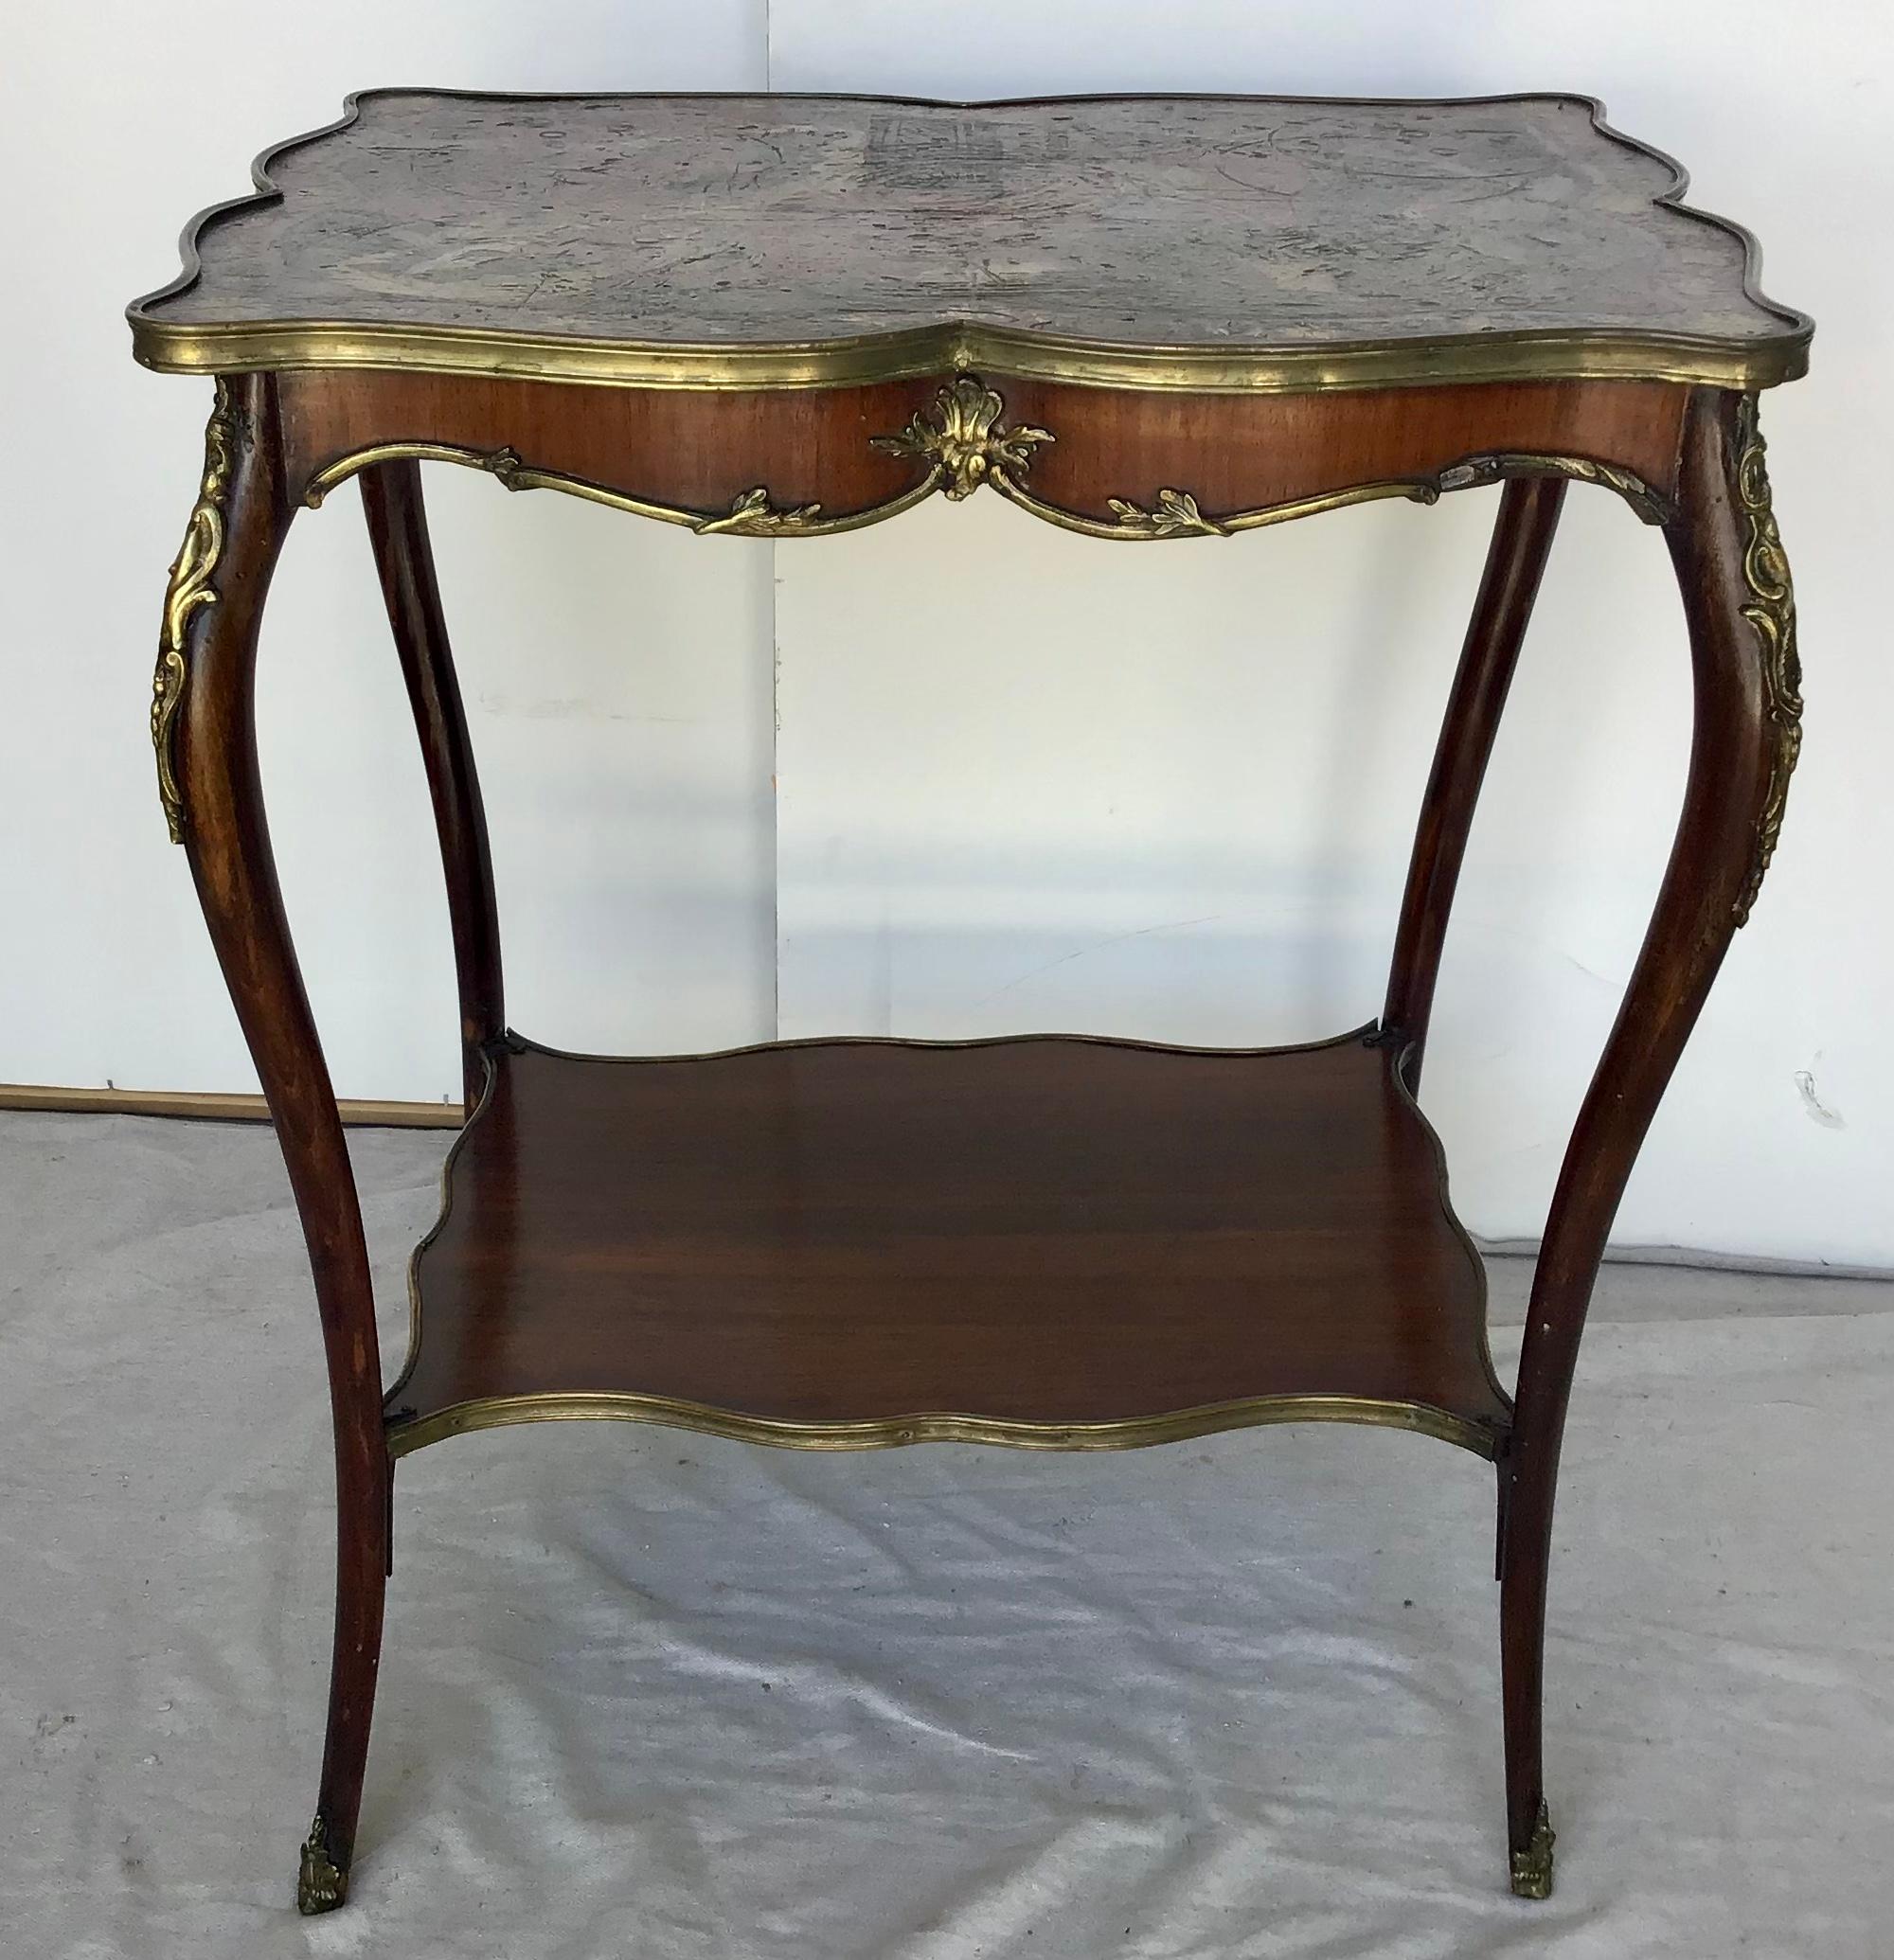 French Louis XV Ormolu Mounted Chinoiserie Leather Top Table In Good Condition For Sale In Bradenton, FL